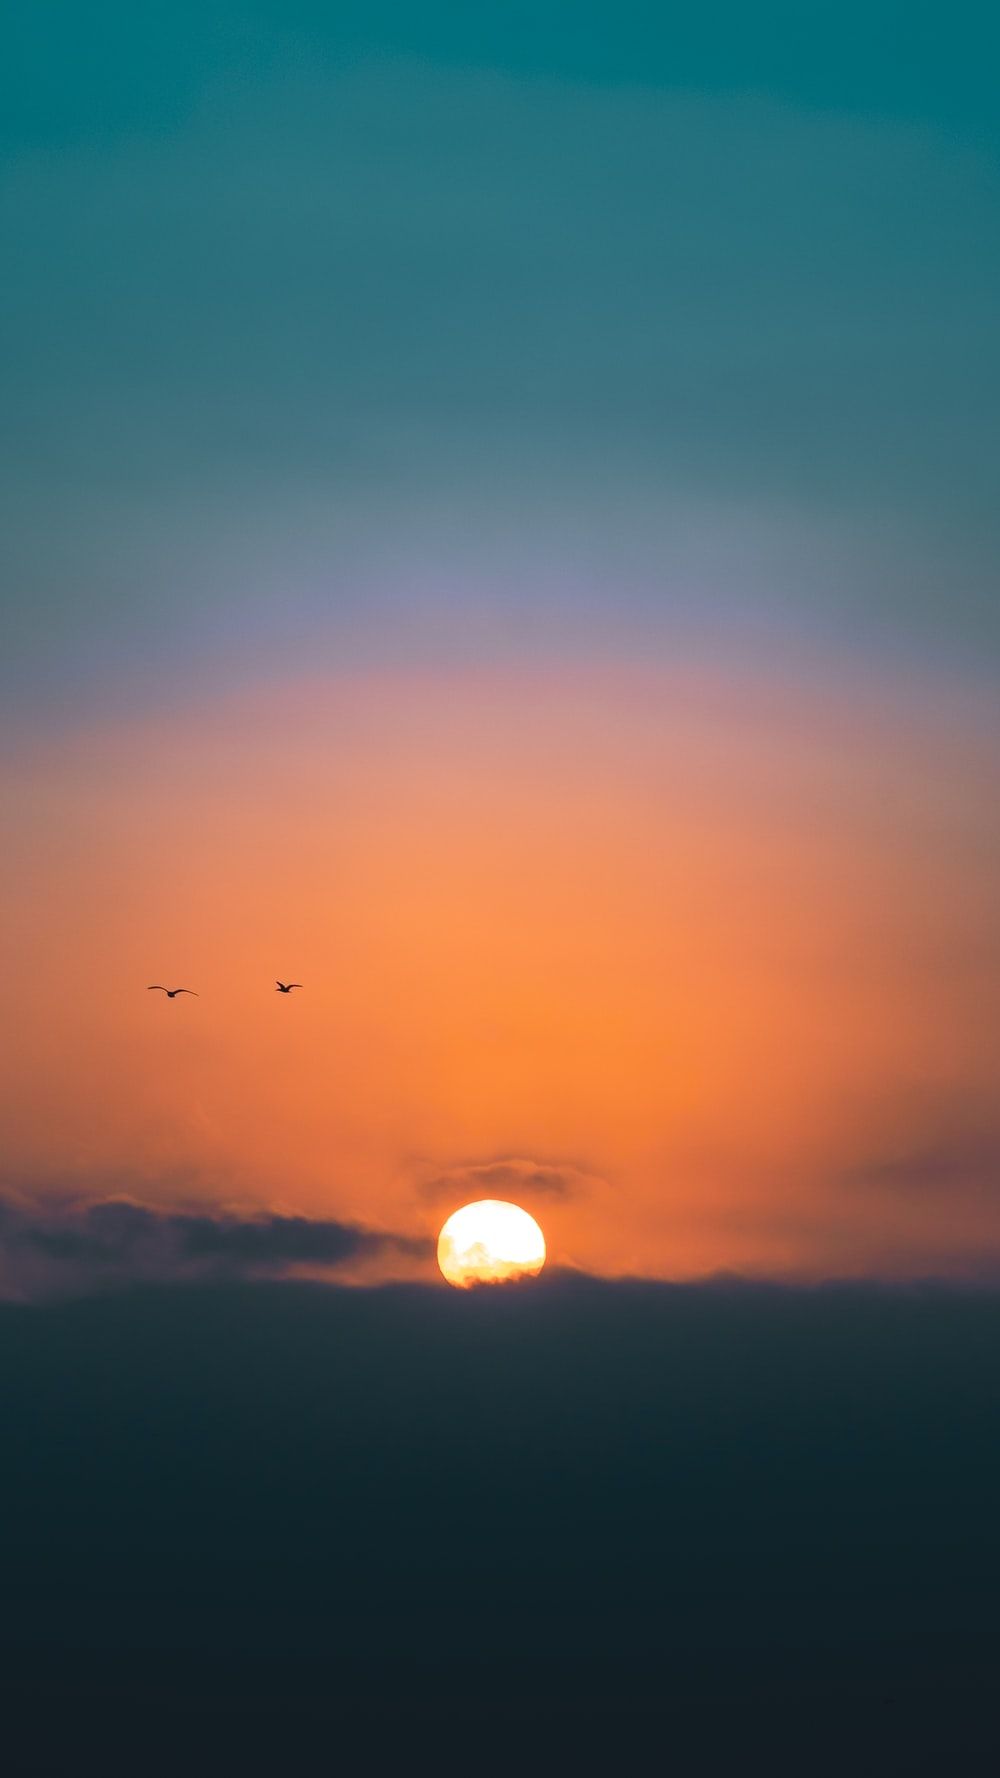 Birds Sunrise Picture. Download Free Image